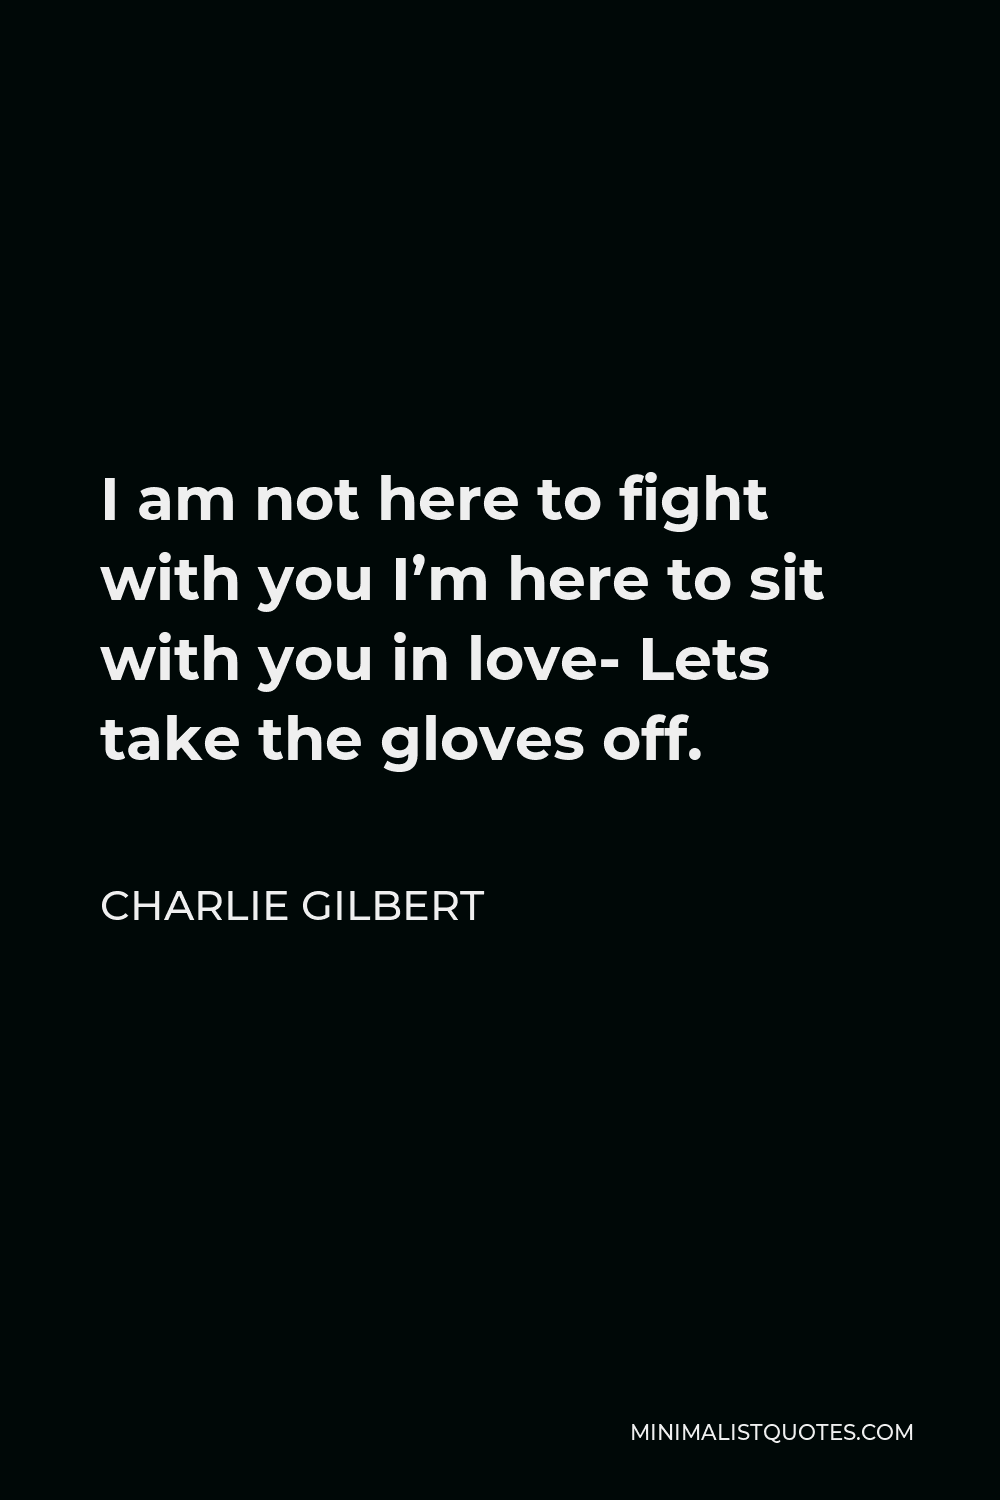 Charlie Gilbert Quote - I am not here to fight with you I’m here to sit with you in love- Lets take the gloves off.